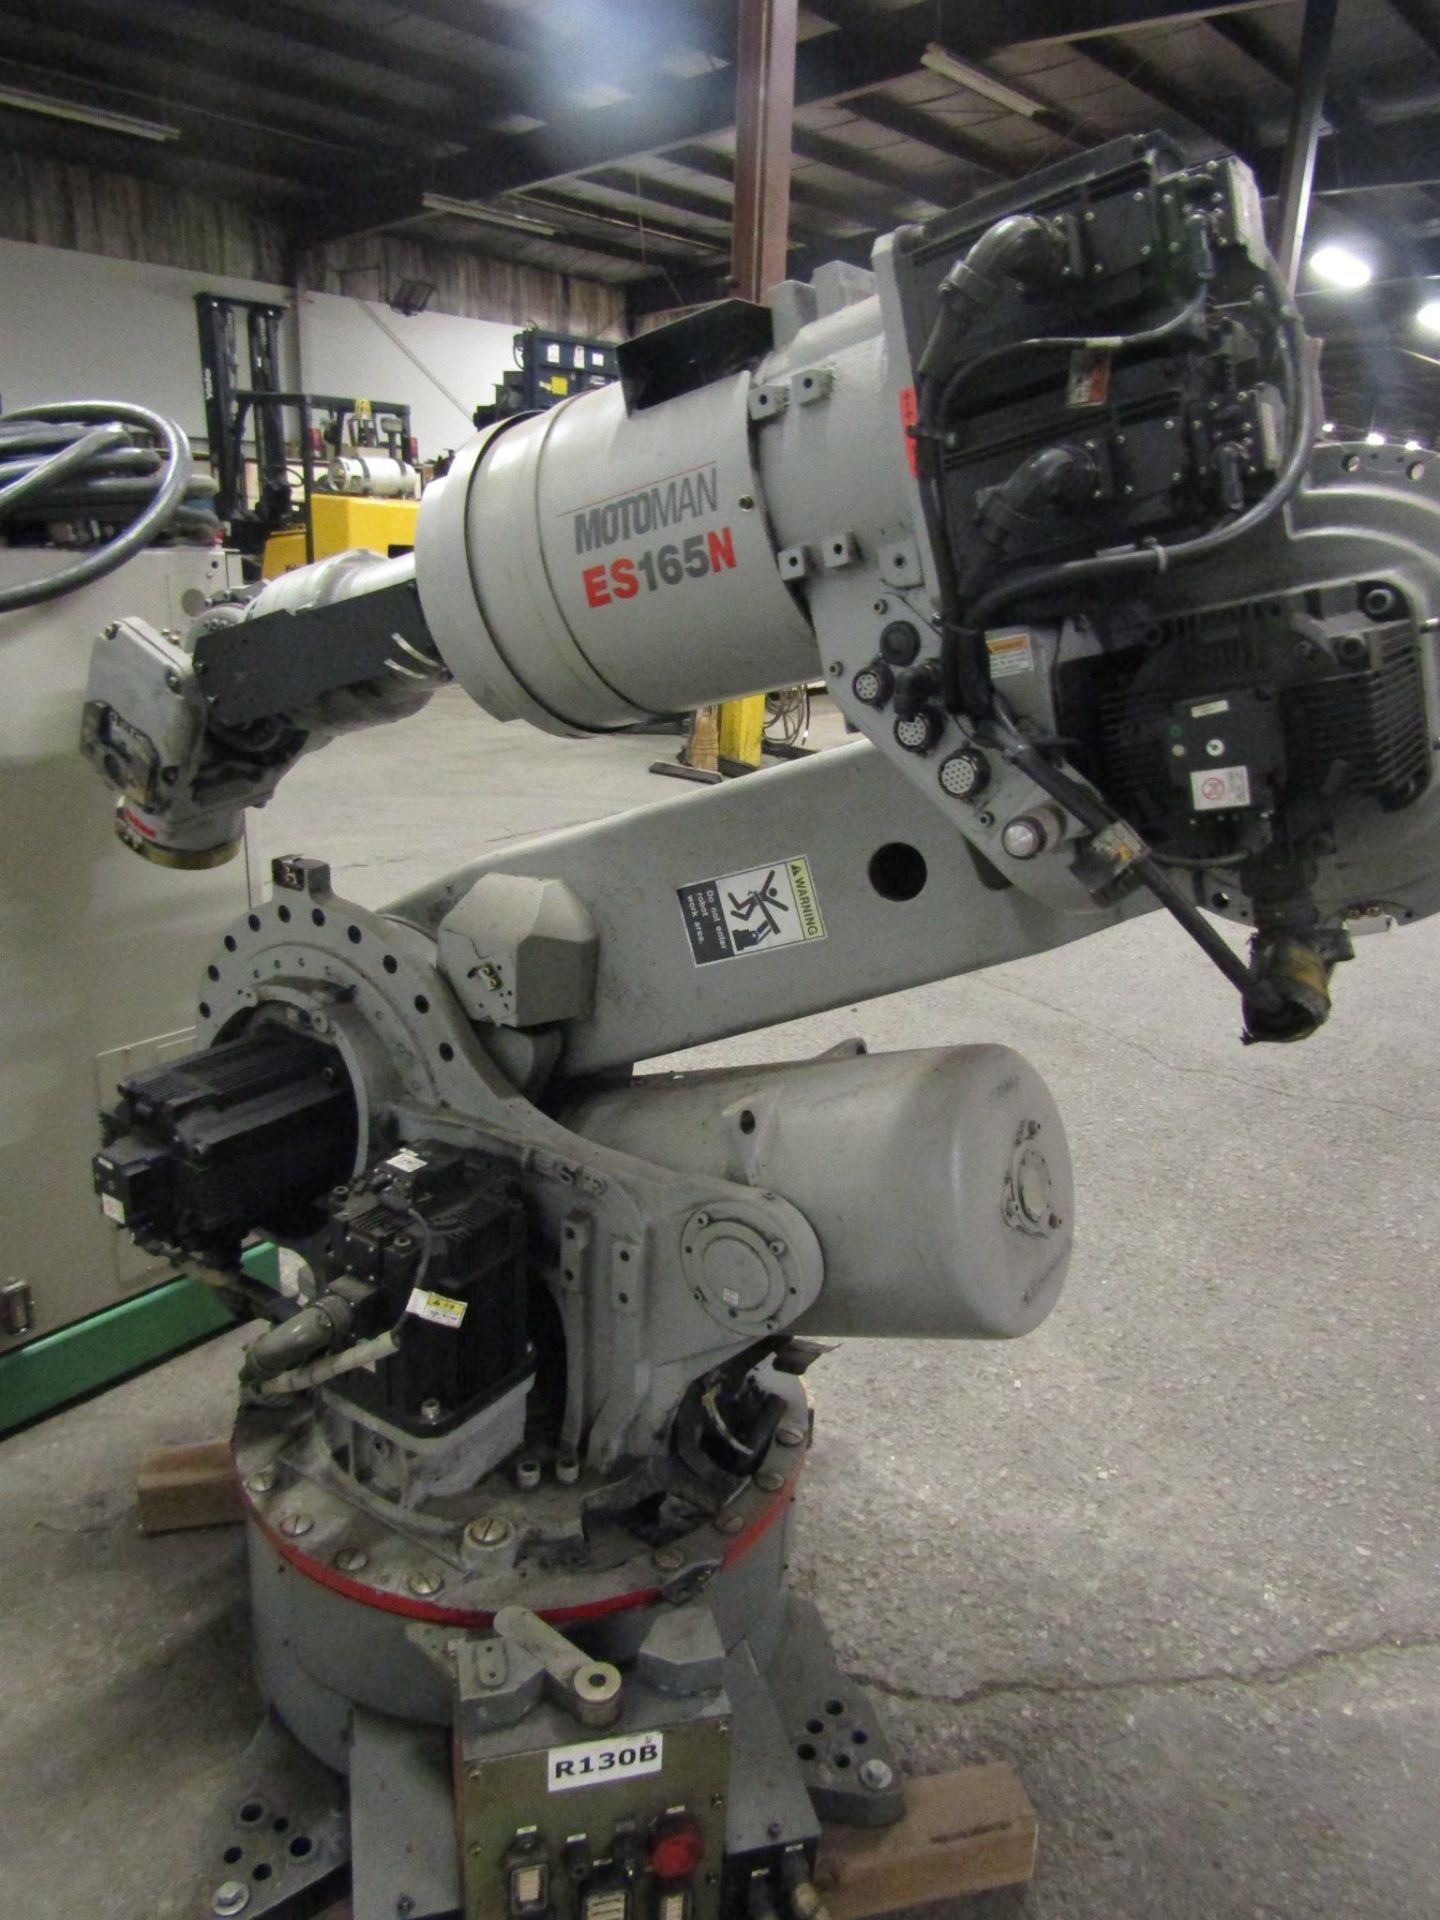 2008 Motoman ES200N Robot 200kg Capacity with Controller COMPLETE with Teach Pendant, Cables, LOW - Image 2 of 3